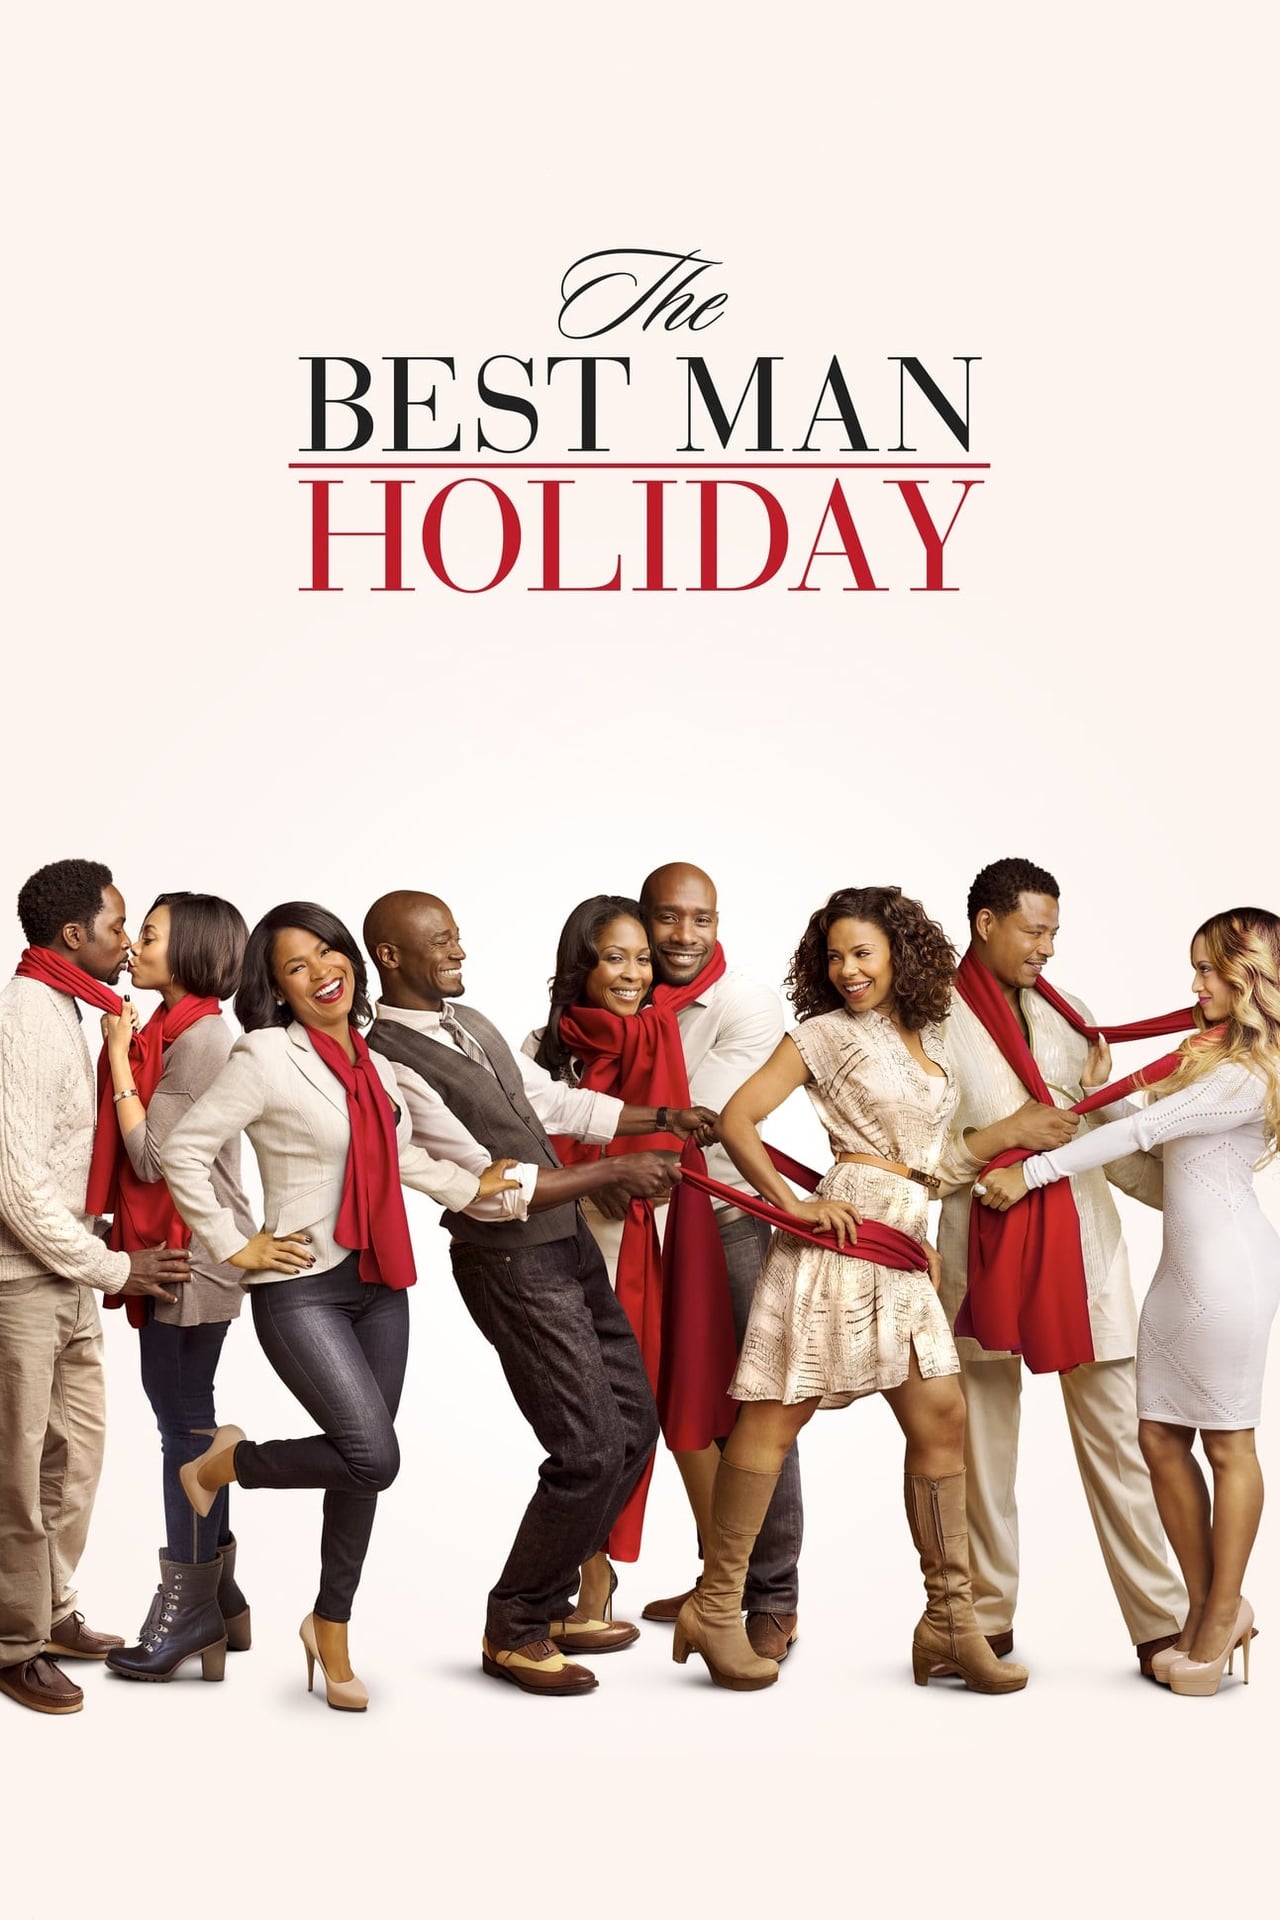 The Best Man Holiday on Netflix